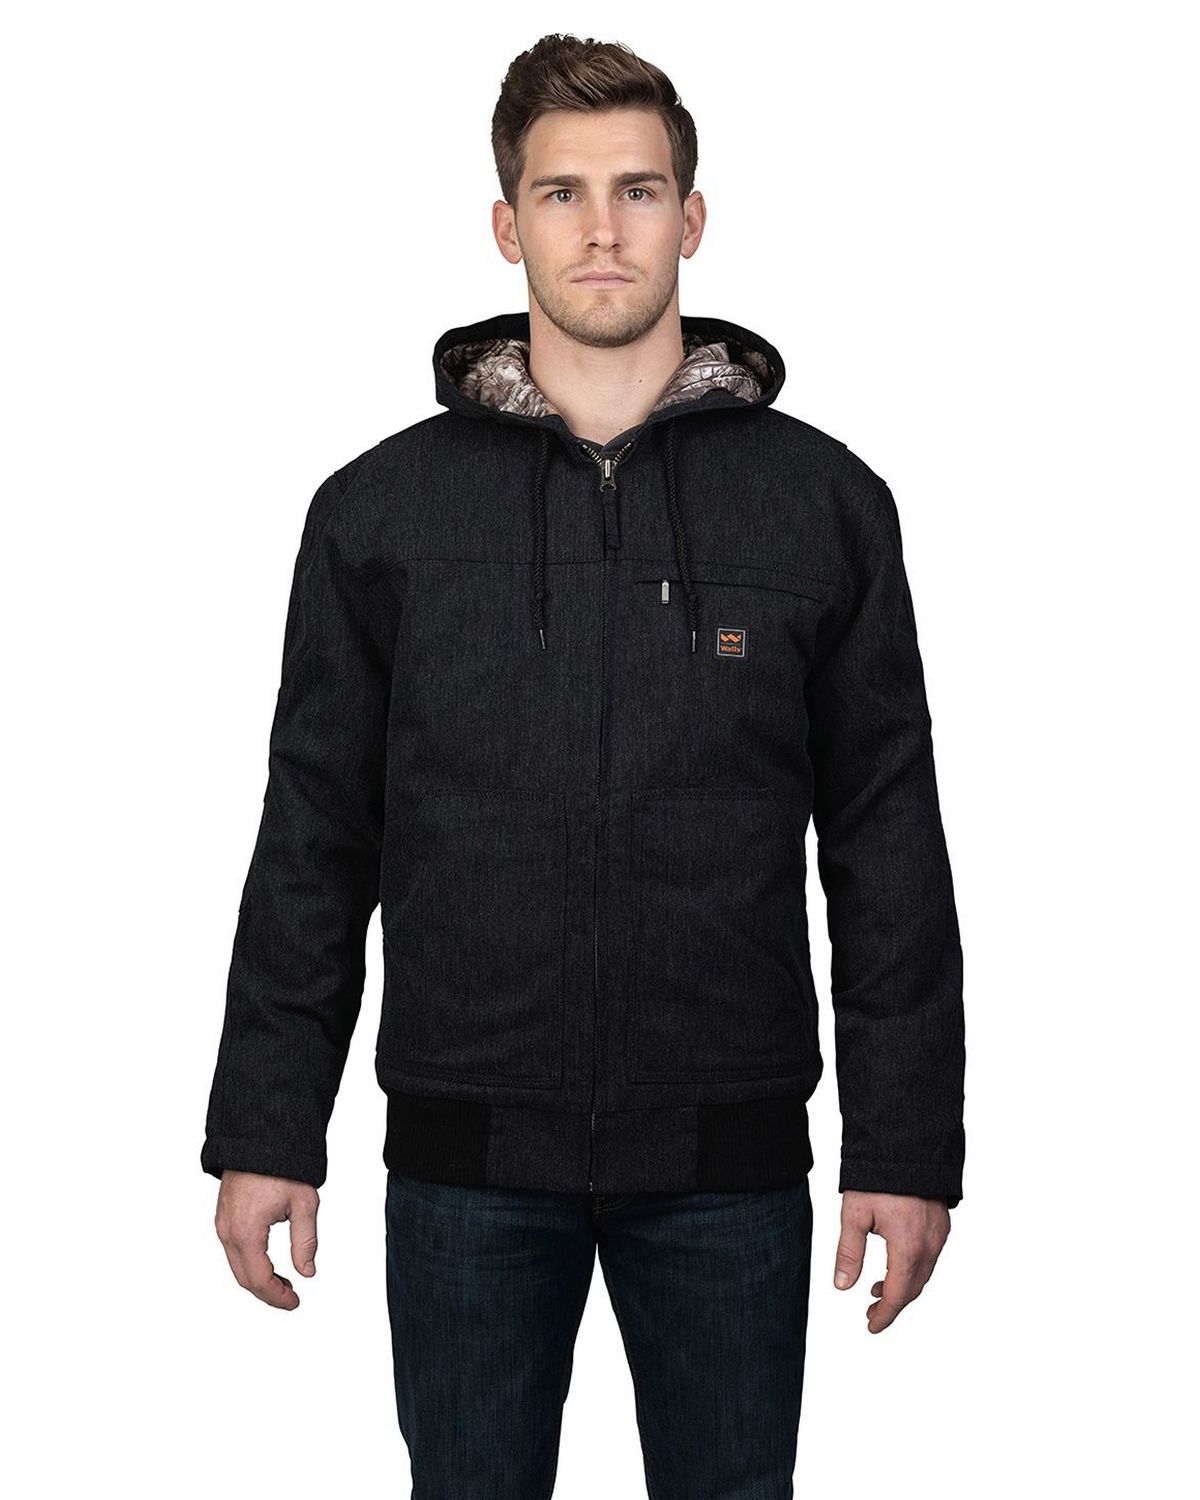 UPC 889440007608 product image for Walls Outdoor YJ524 Unisex Workwear Muscle Back Hooded Jacket with Kevlar - Midn | upcitemdb.com